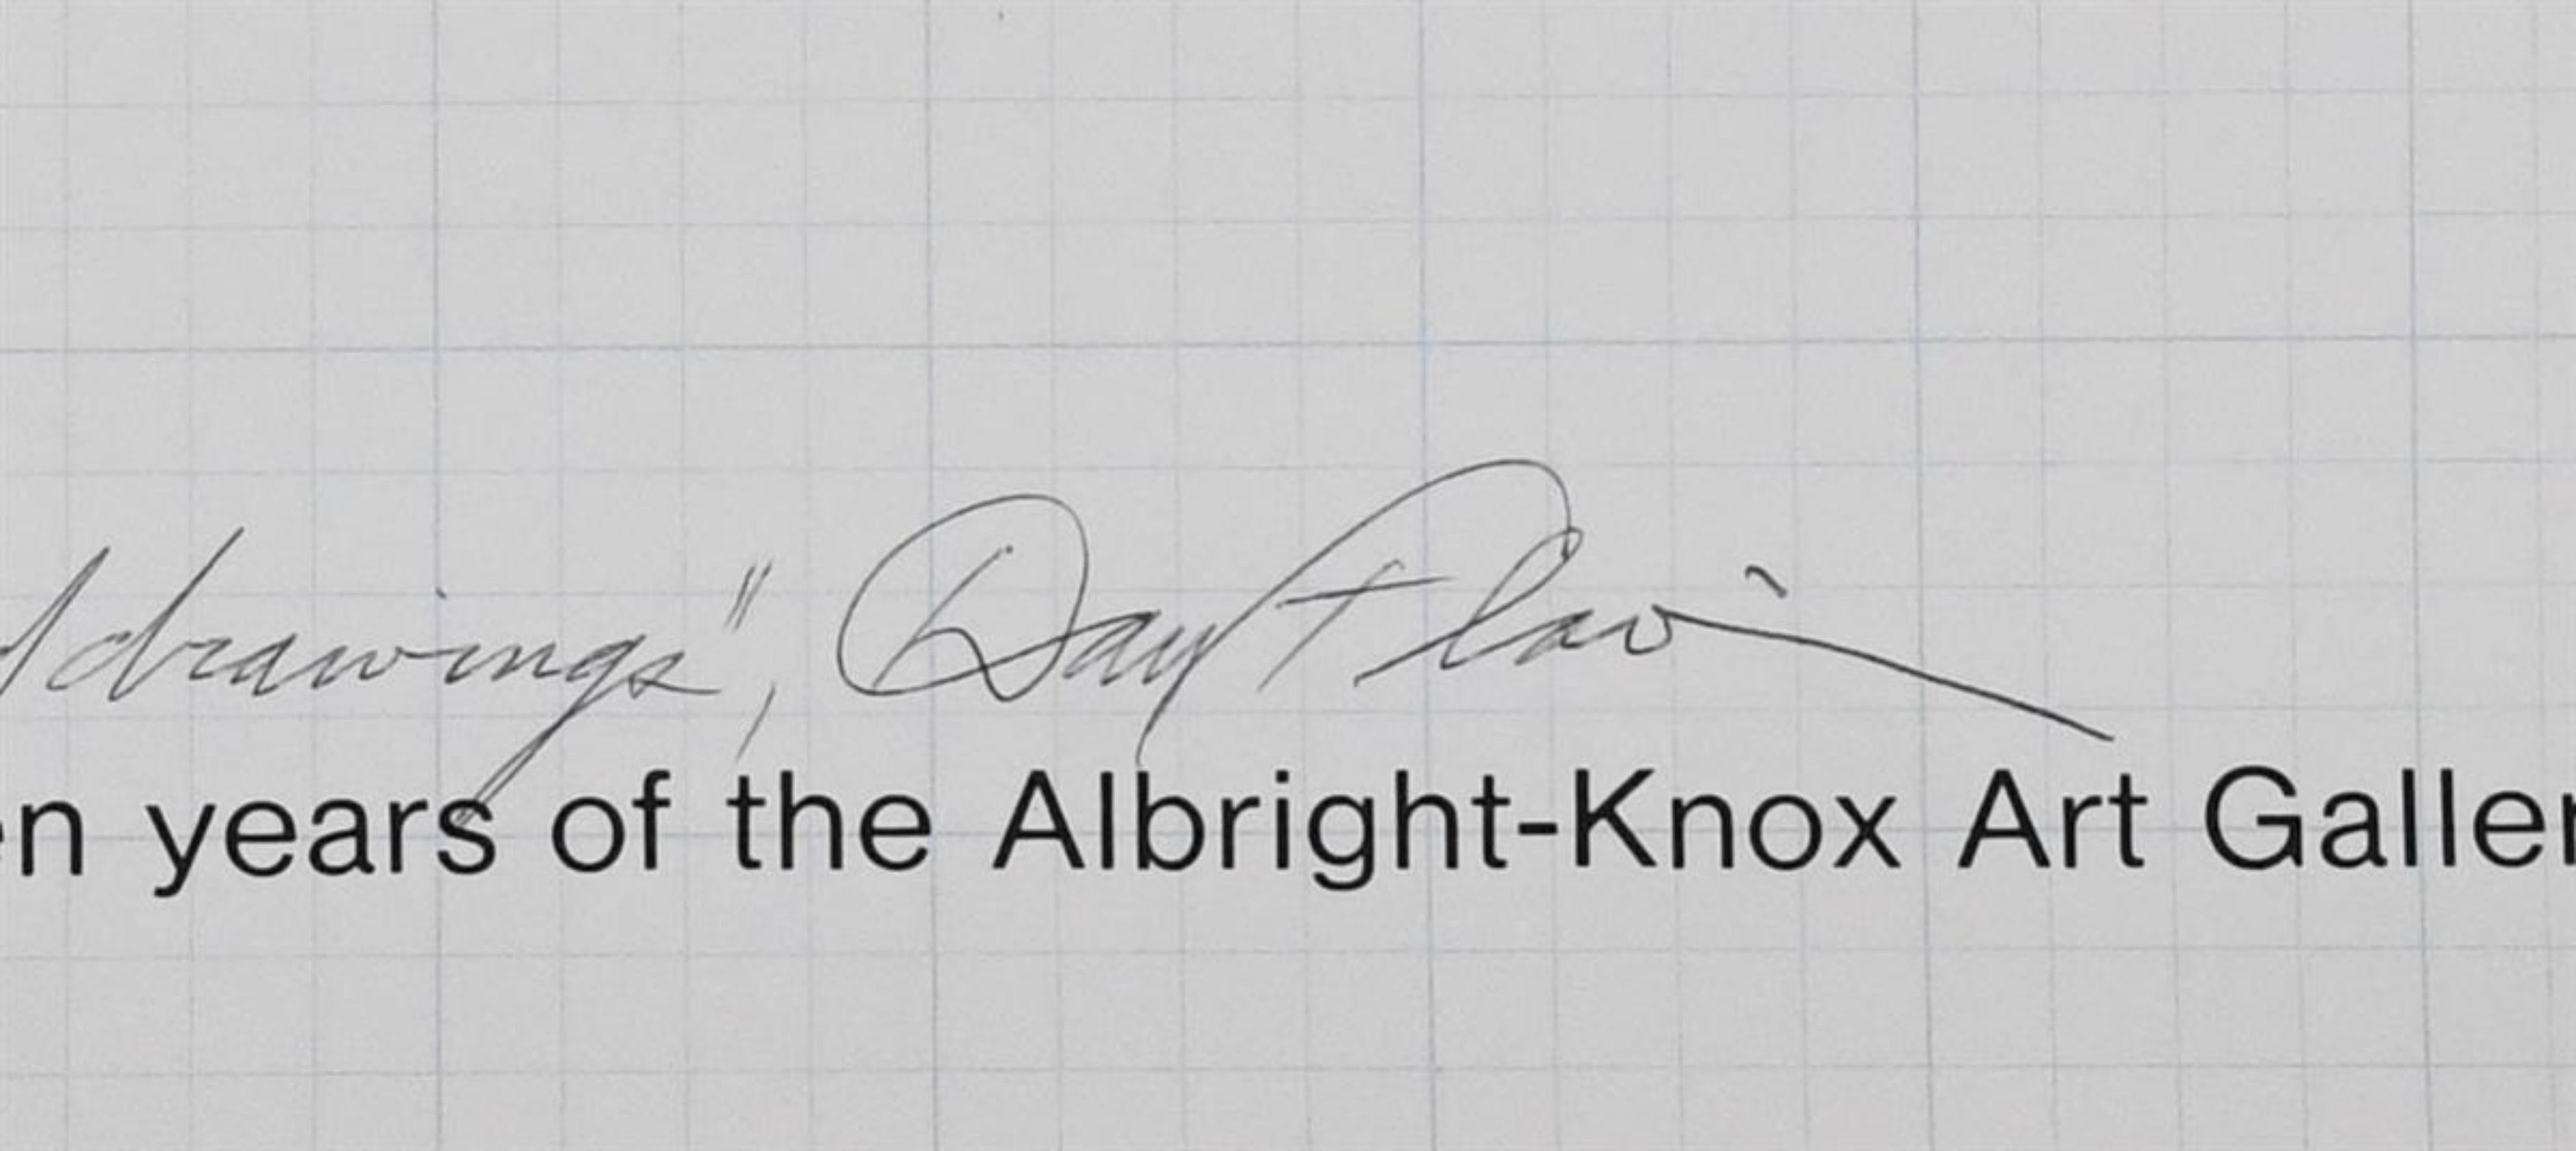 Rare Albright Knox museum poster (hand signed and inscribed to renowned curator) - Print by Dan Flavin